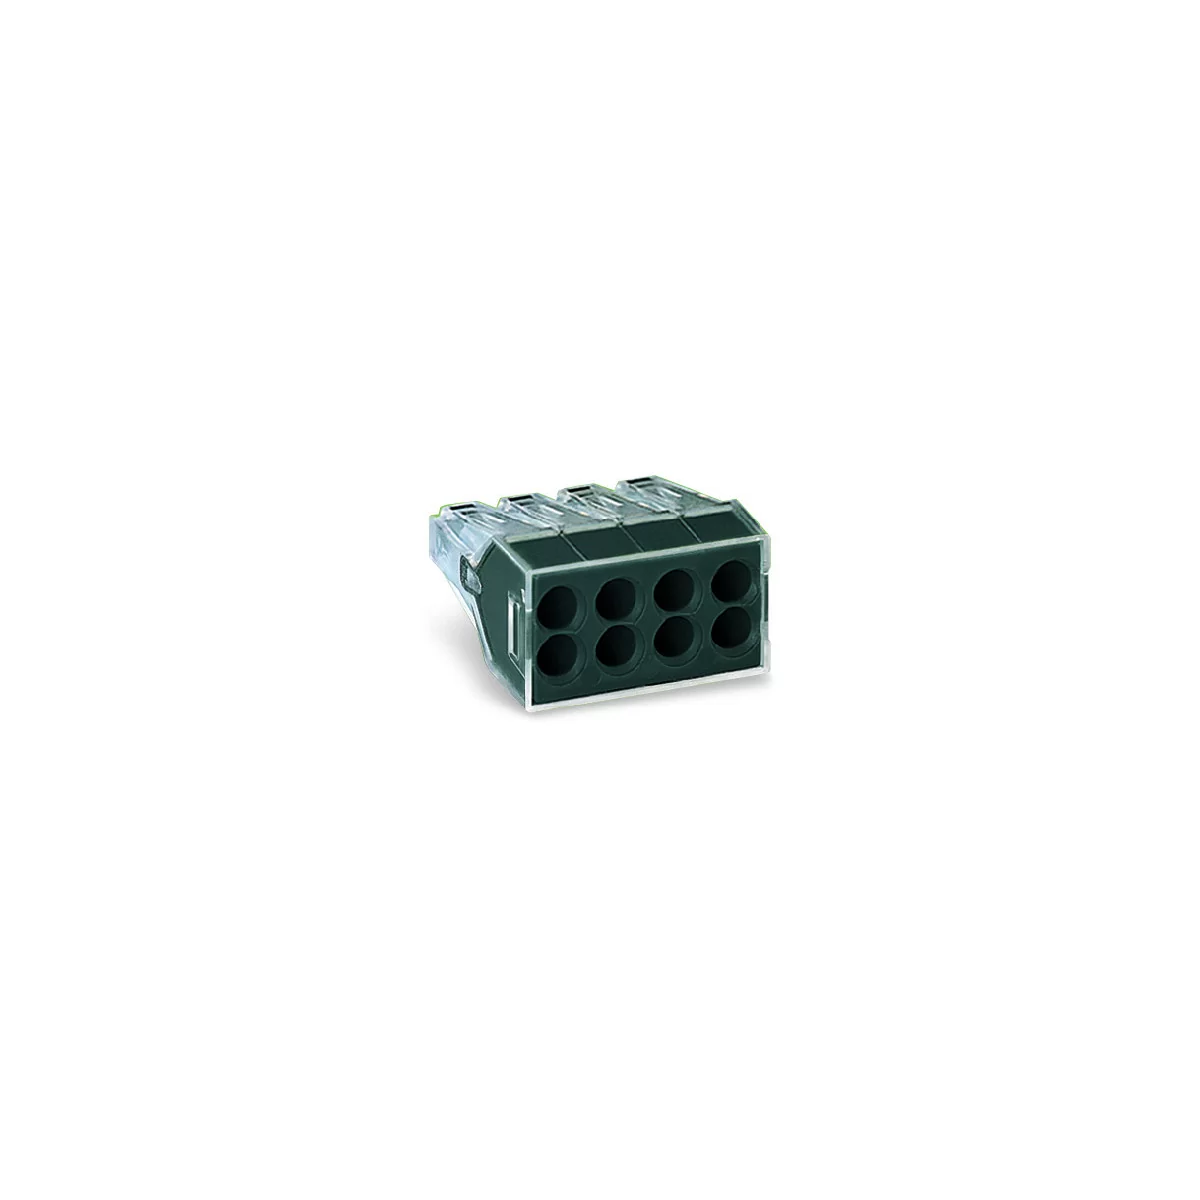 Wago - Push-In Wire Connector - 8 Port - Dark Gray - 50 Pack - 773-168 